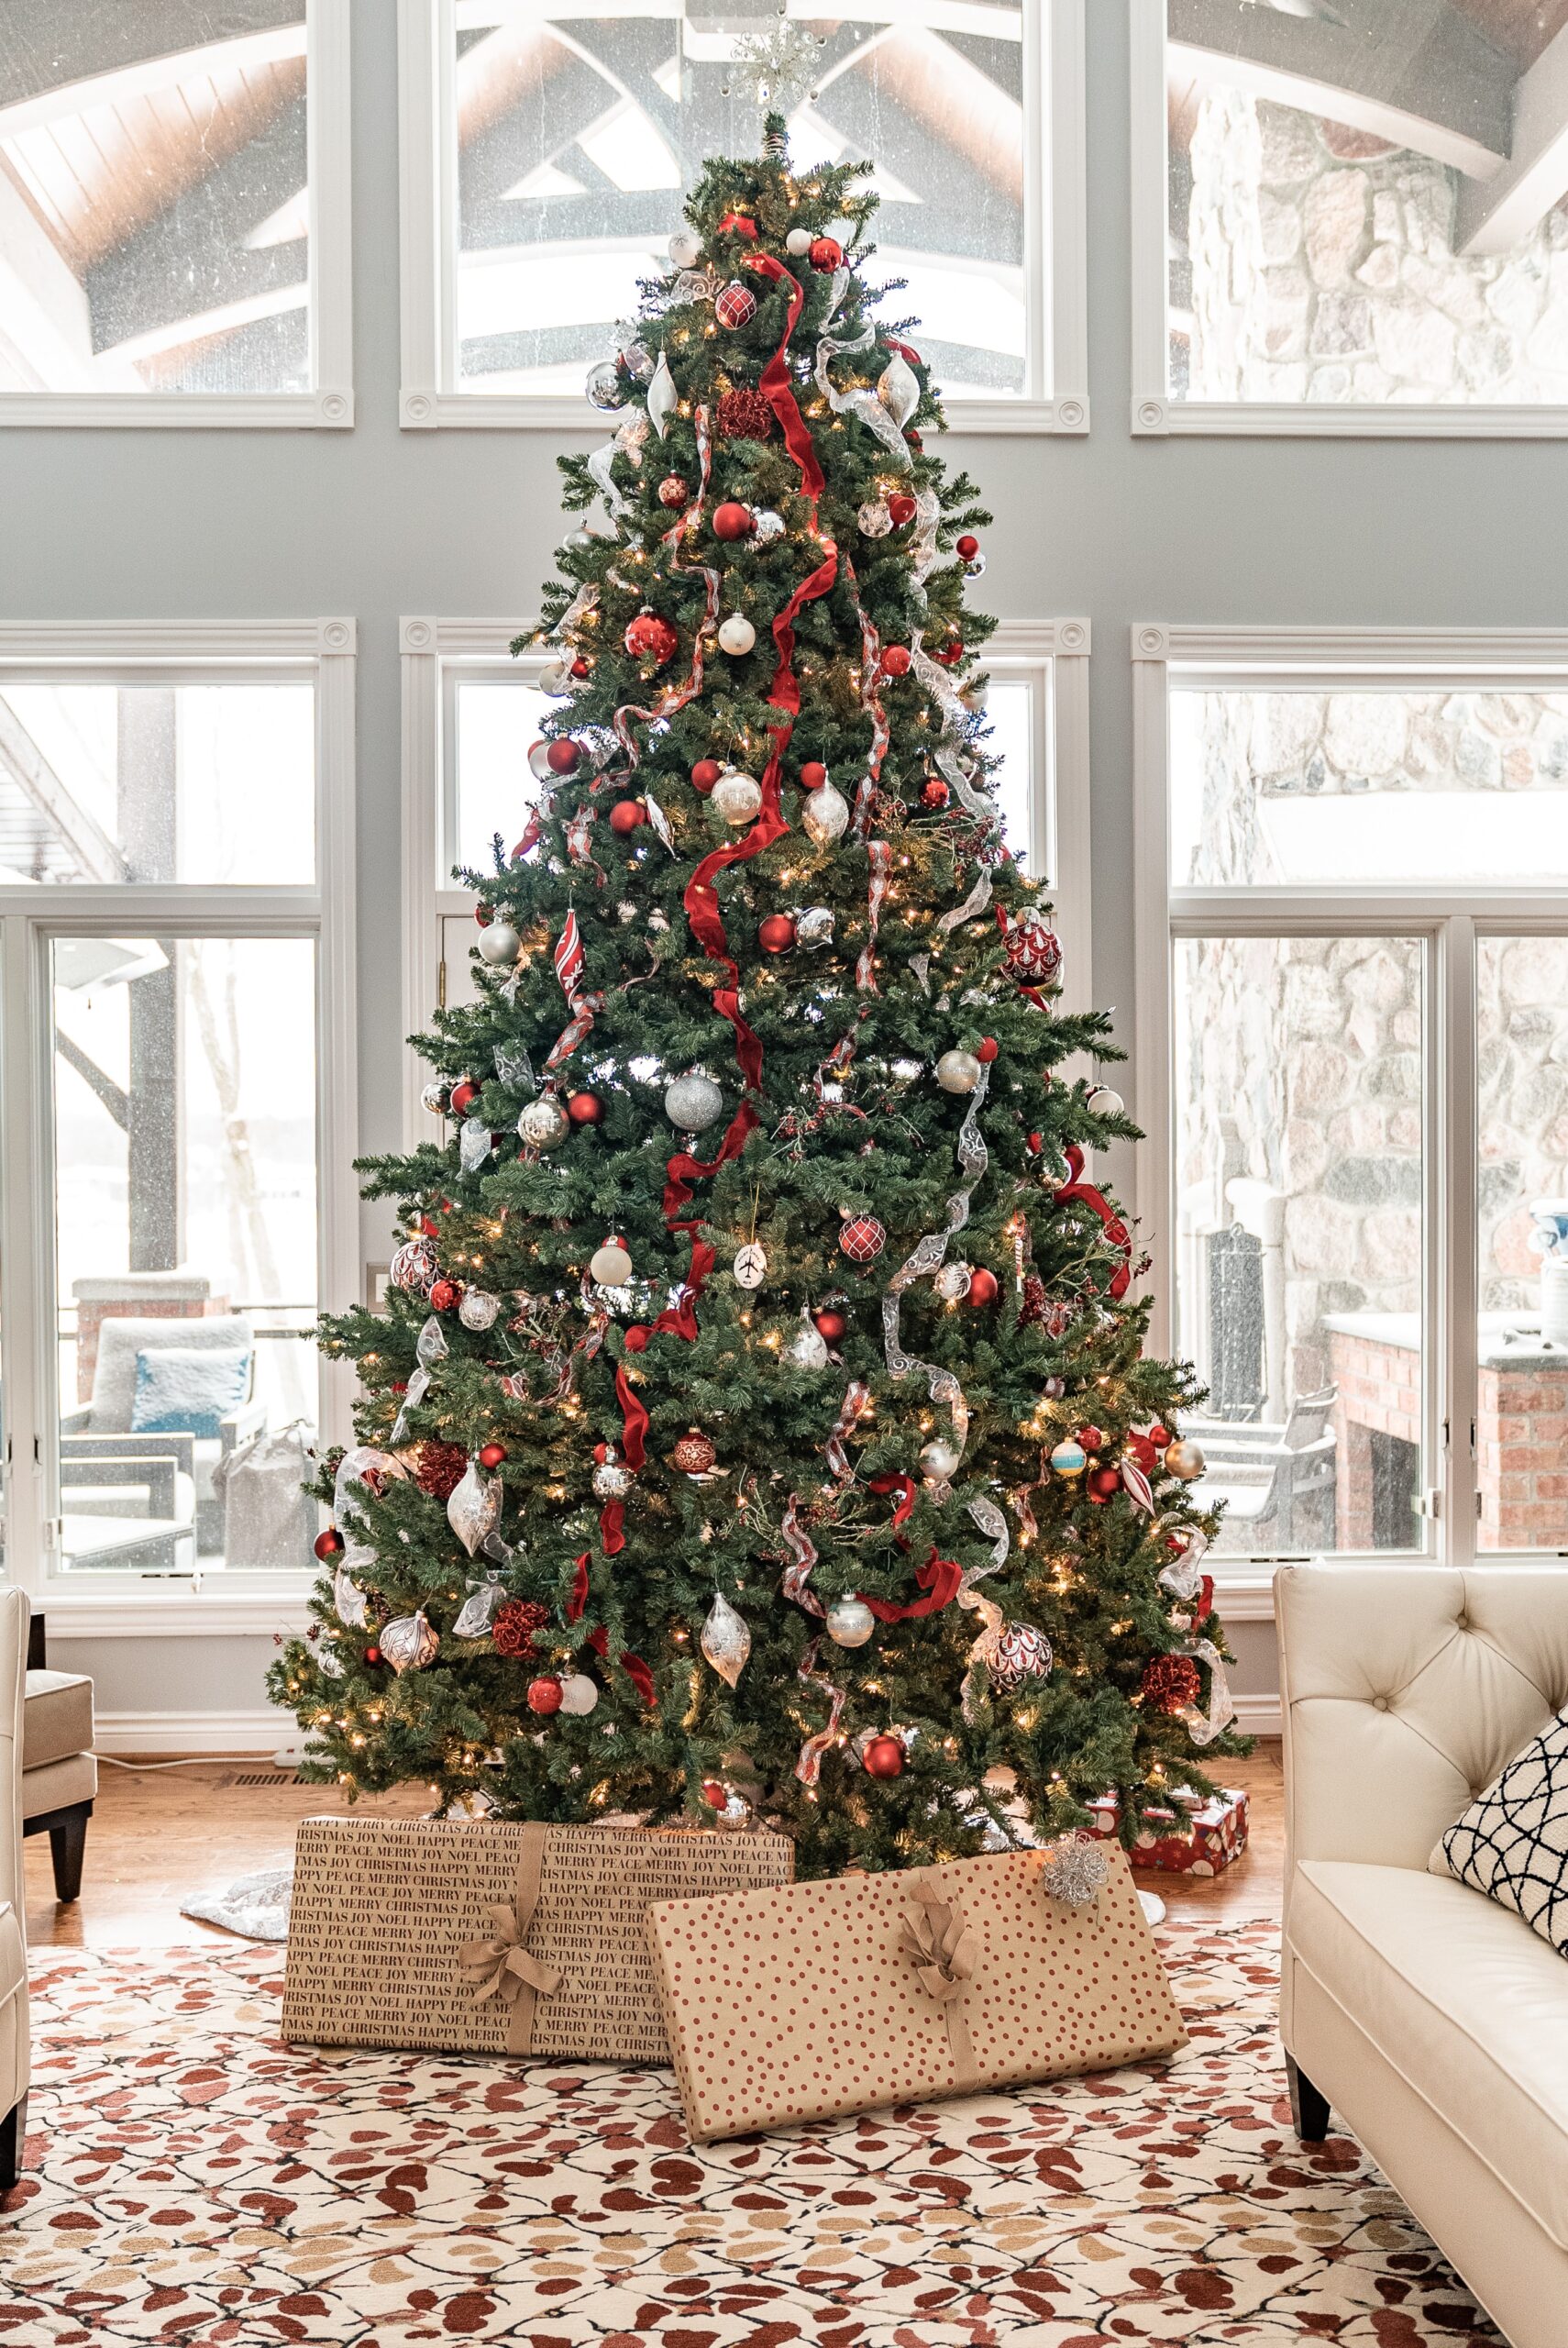 Lights, Ornaments, Action! Picking the Showstopper Christmas Tree of